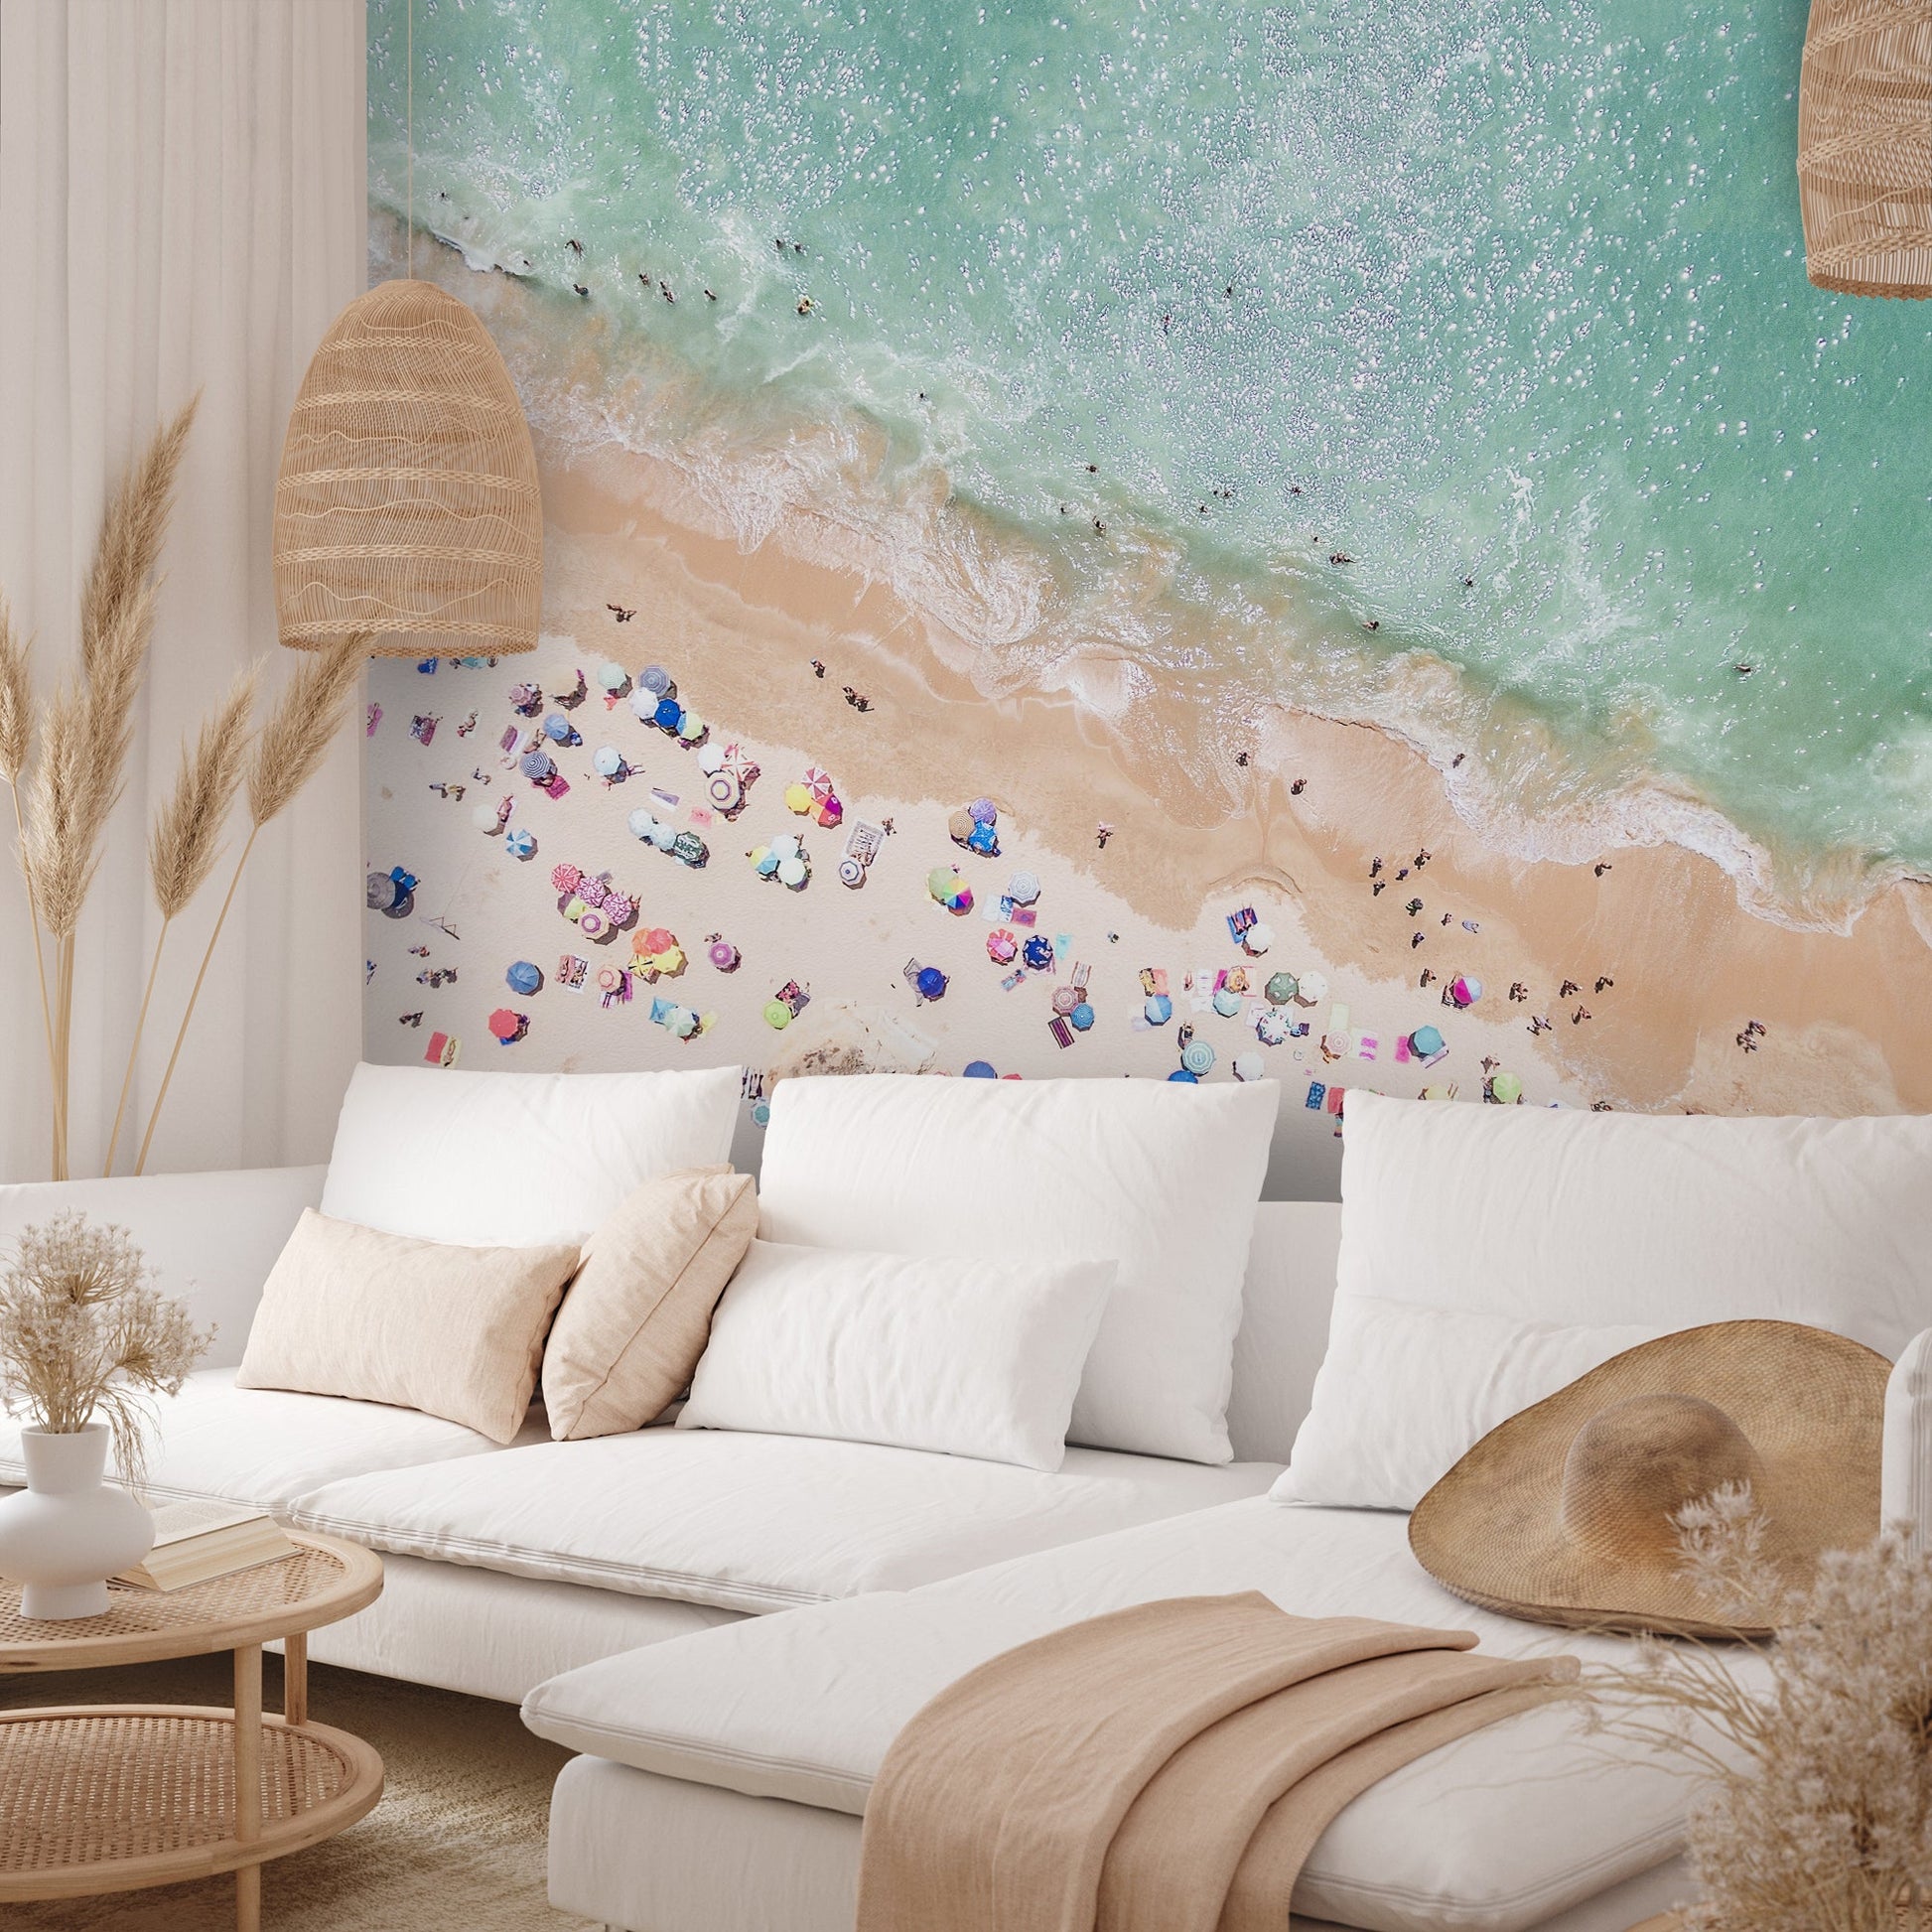 Peel & Stick Wall Mural - Pastel Beach By Sisi and Seb